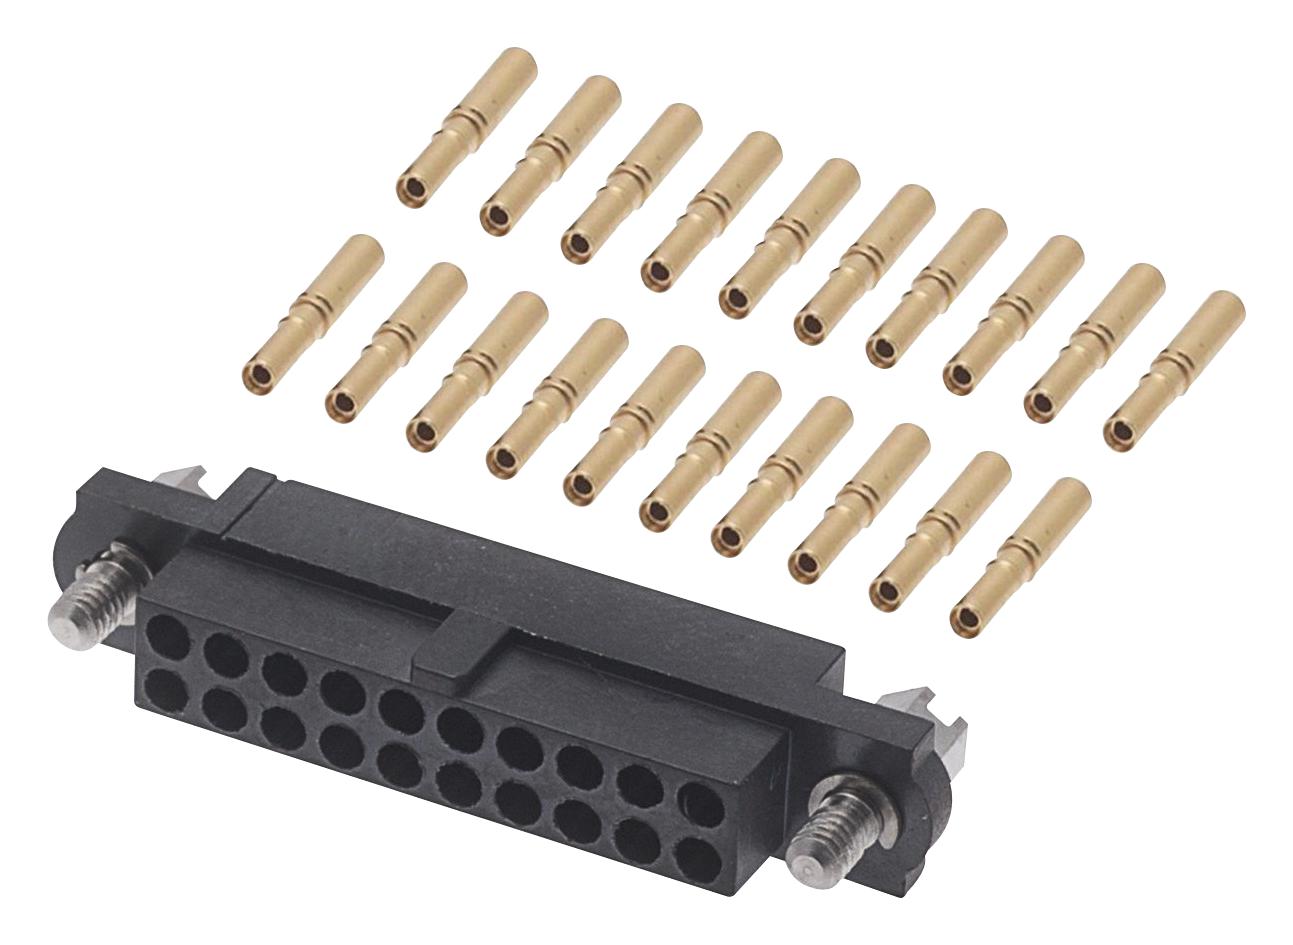 M80-4612005 CONNECTOR, RECEPTACLE, 20POS, 2ROW, 2MM HARWIN